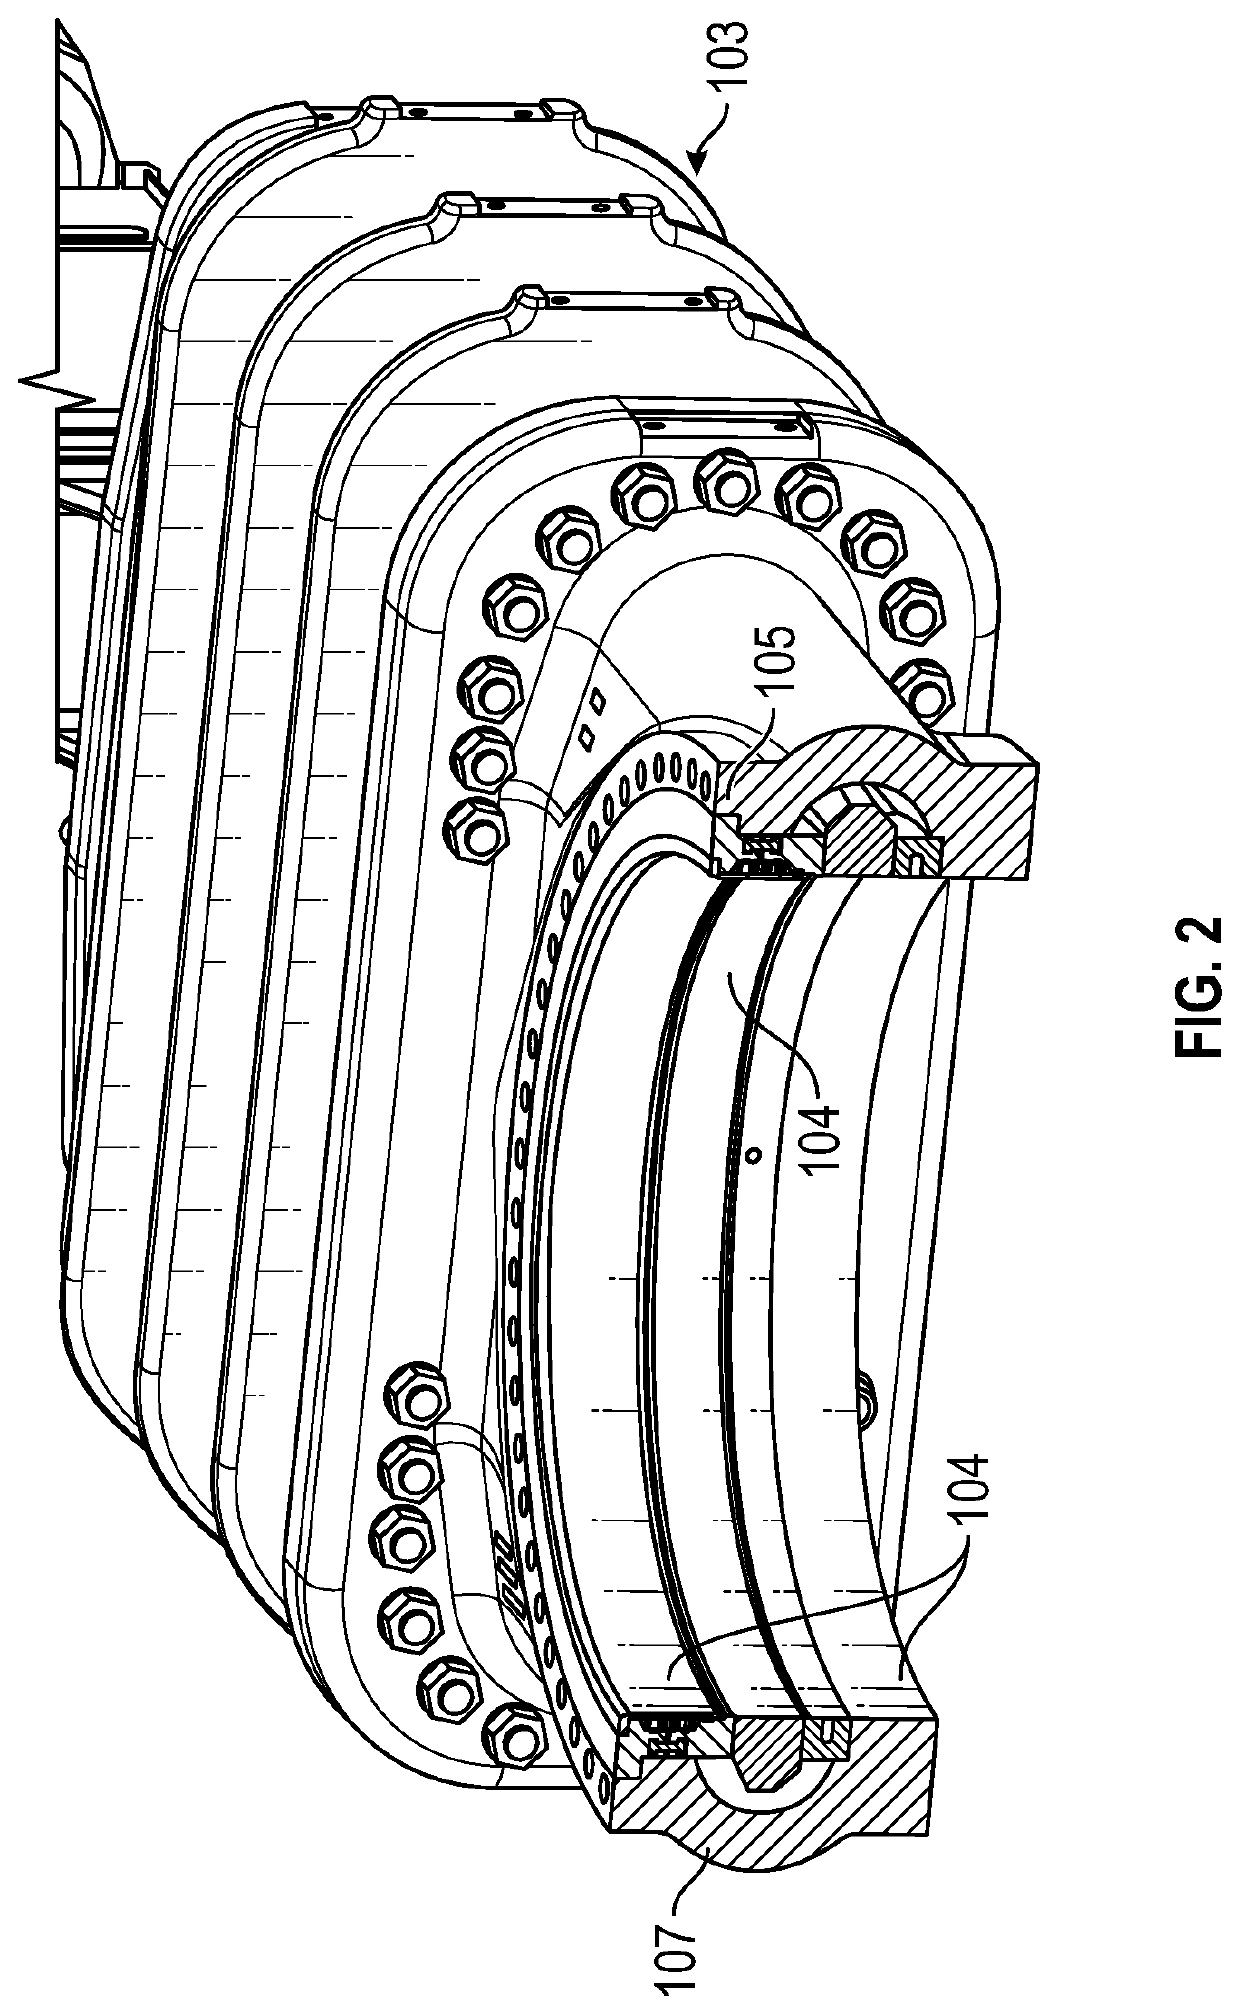 Systems and Methods for Valve Sealing